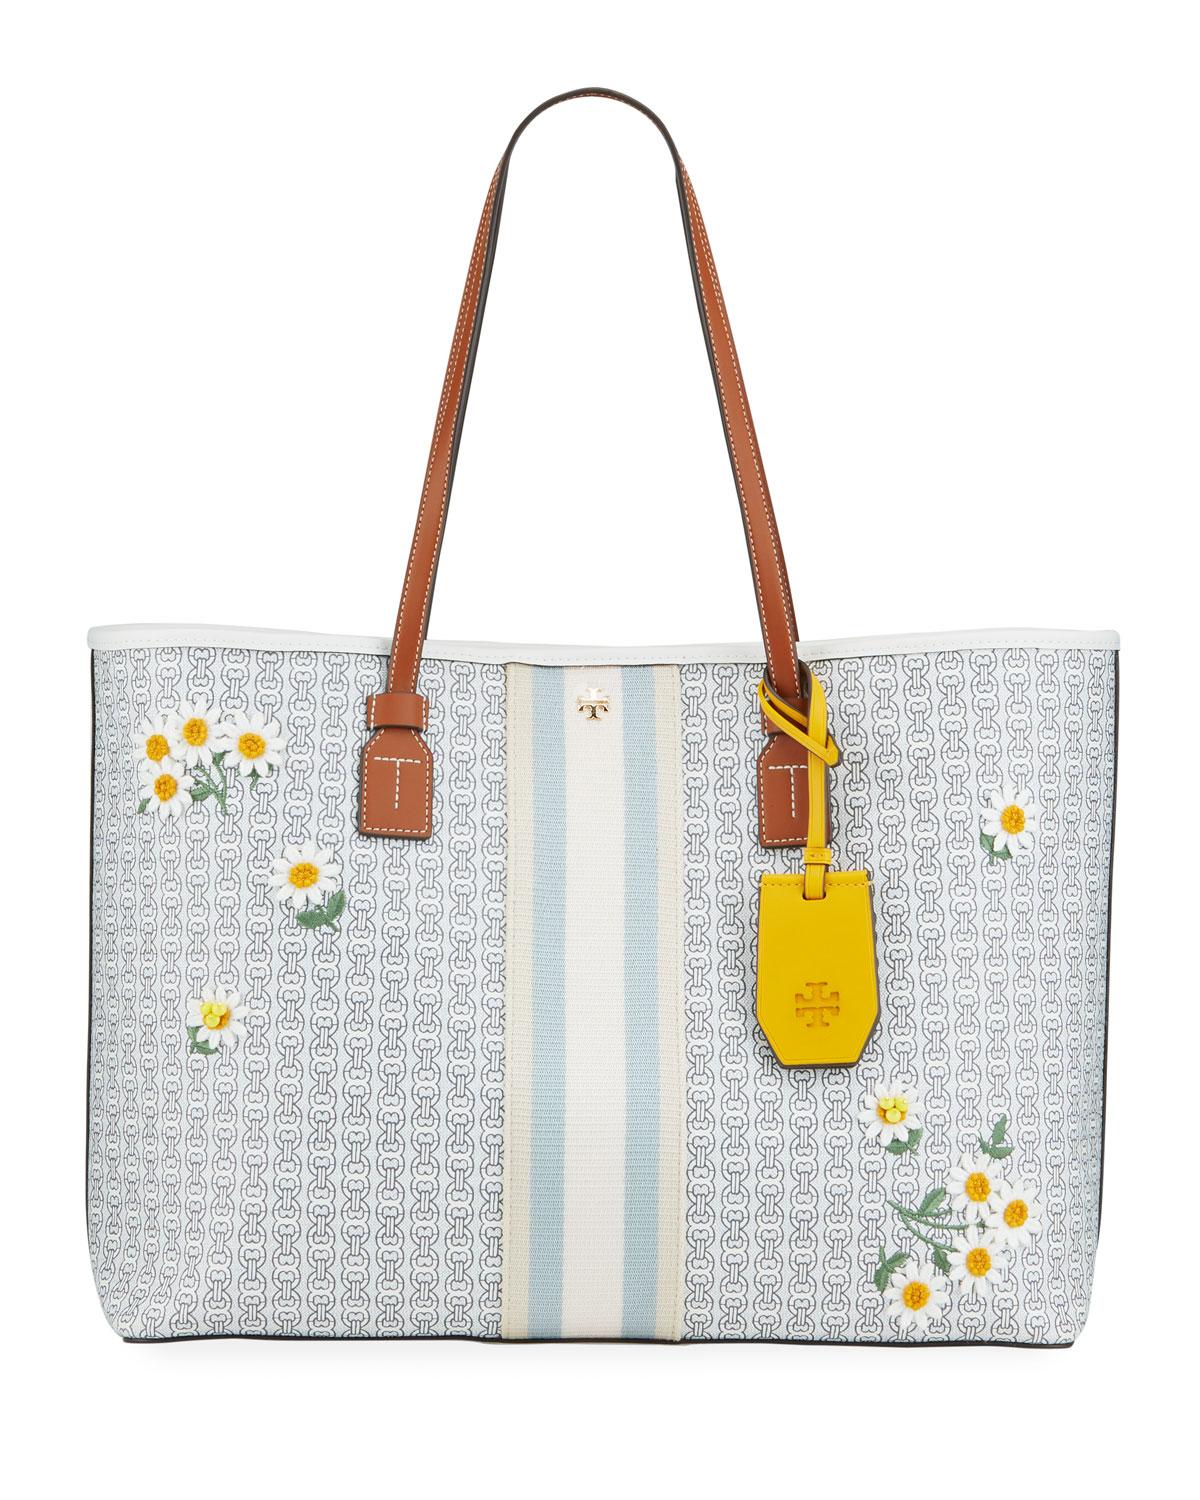 ON SALE* TORY BURCH #41580 Gemini Link Tote Bag – ALL YOUR BLISS